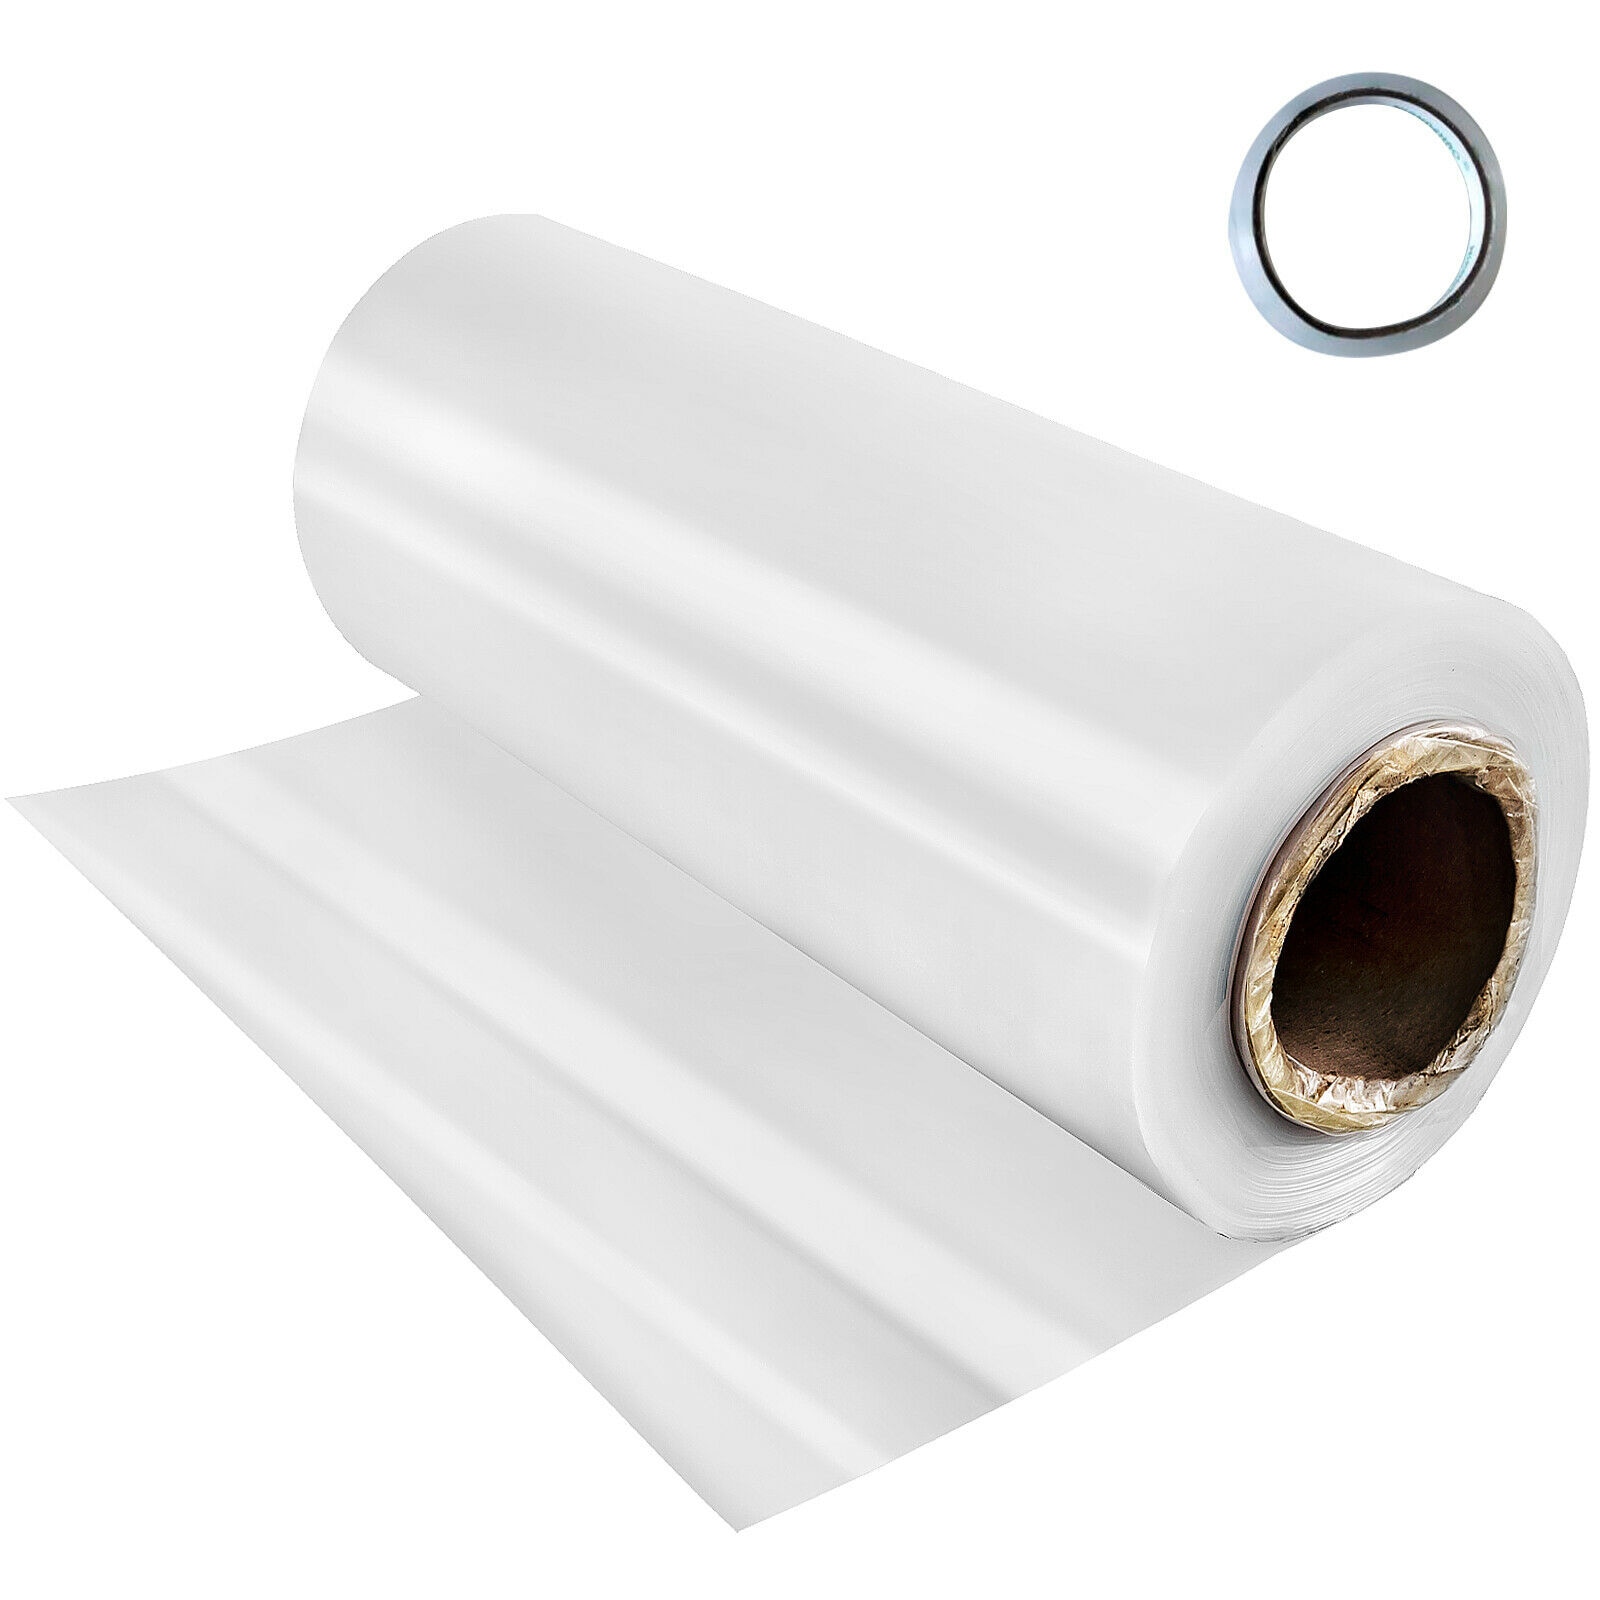 Farm Plastic Supply - Clear Vinyl Sheeting - 15 Mil - (4'6 x 3.5') - Vinyl Plastic Sheeting, Clear Vinyl Sheet for Storm Windows, Covering, Protectio